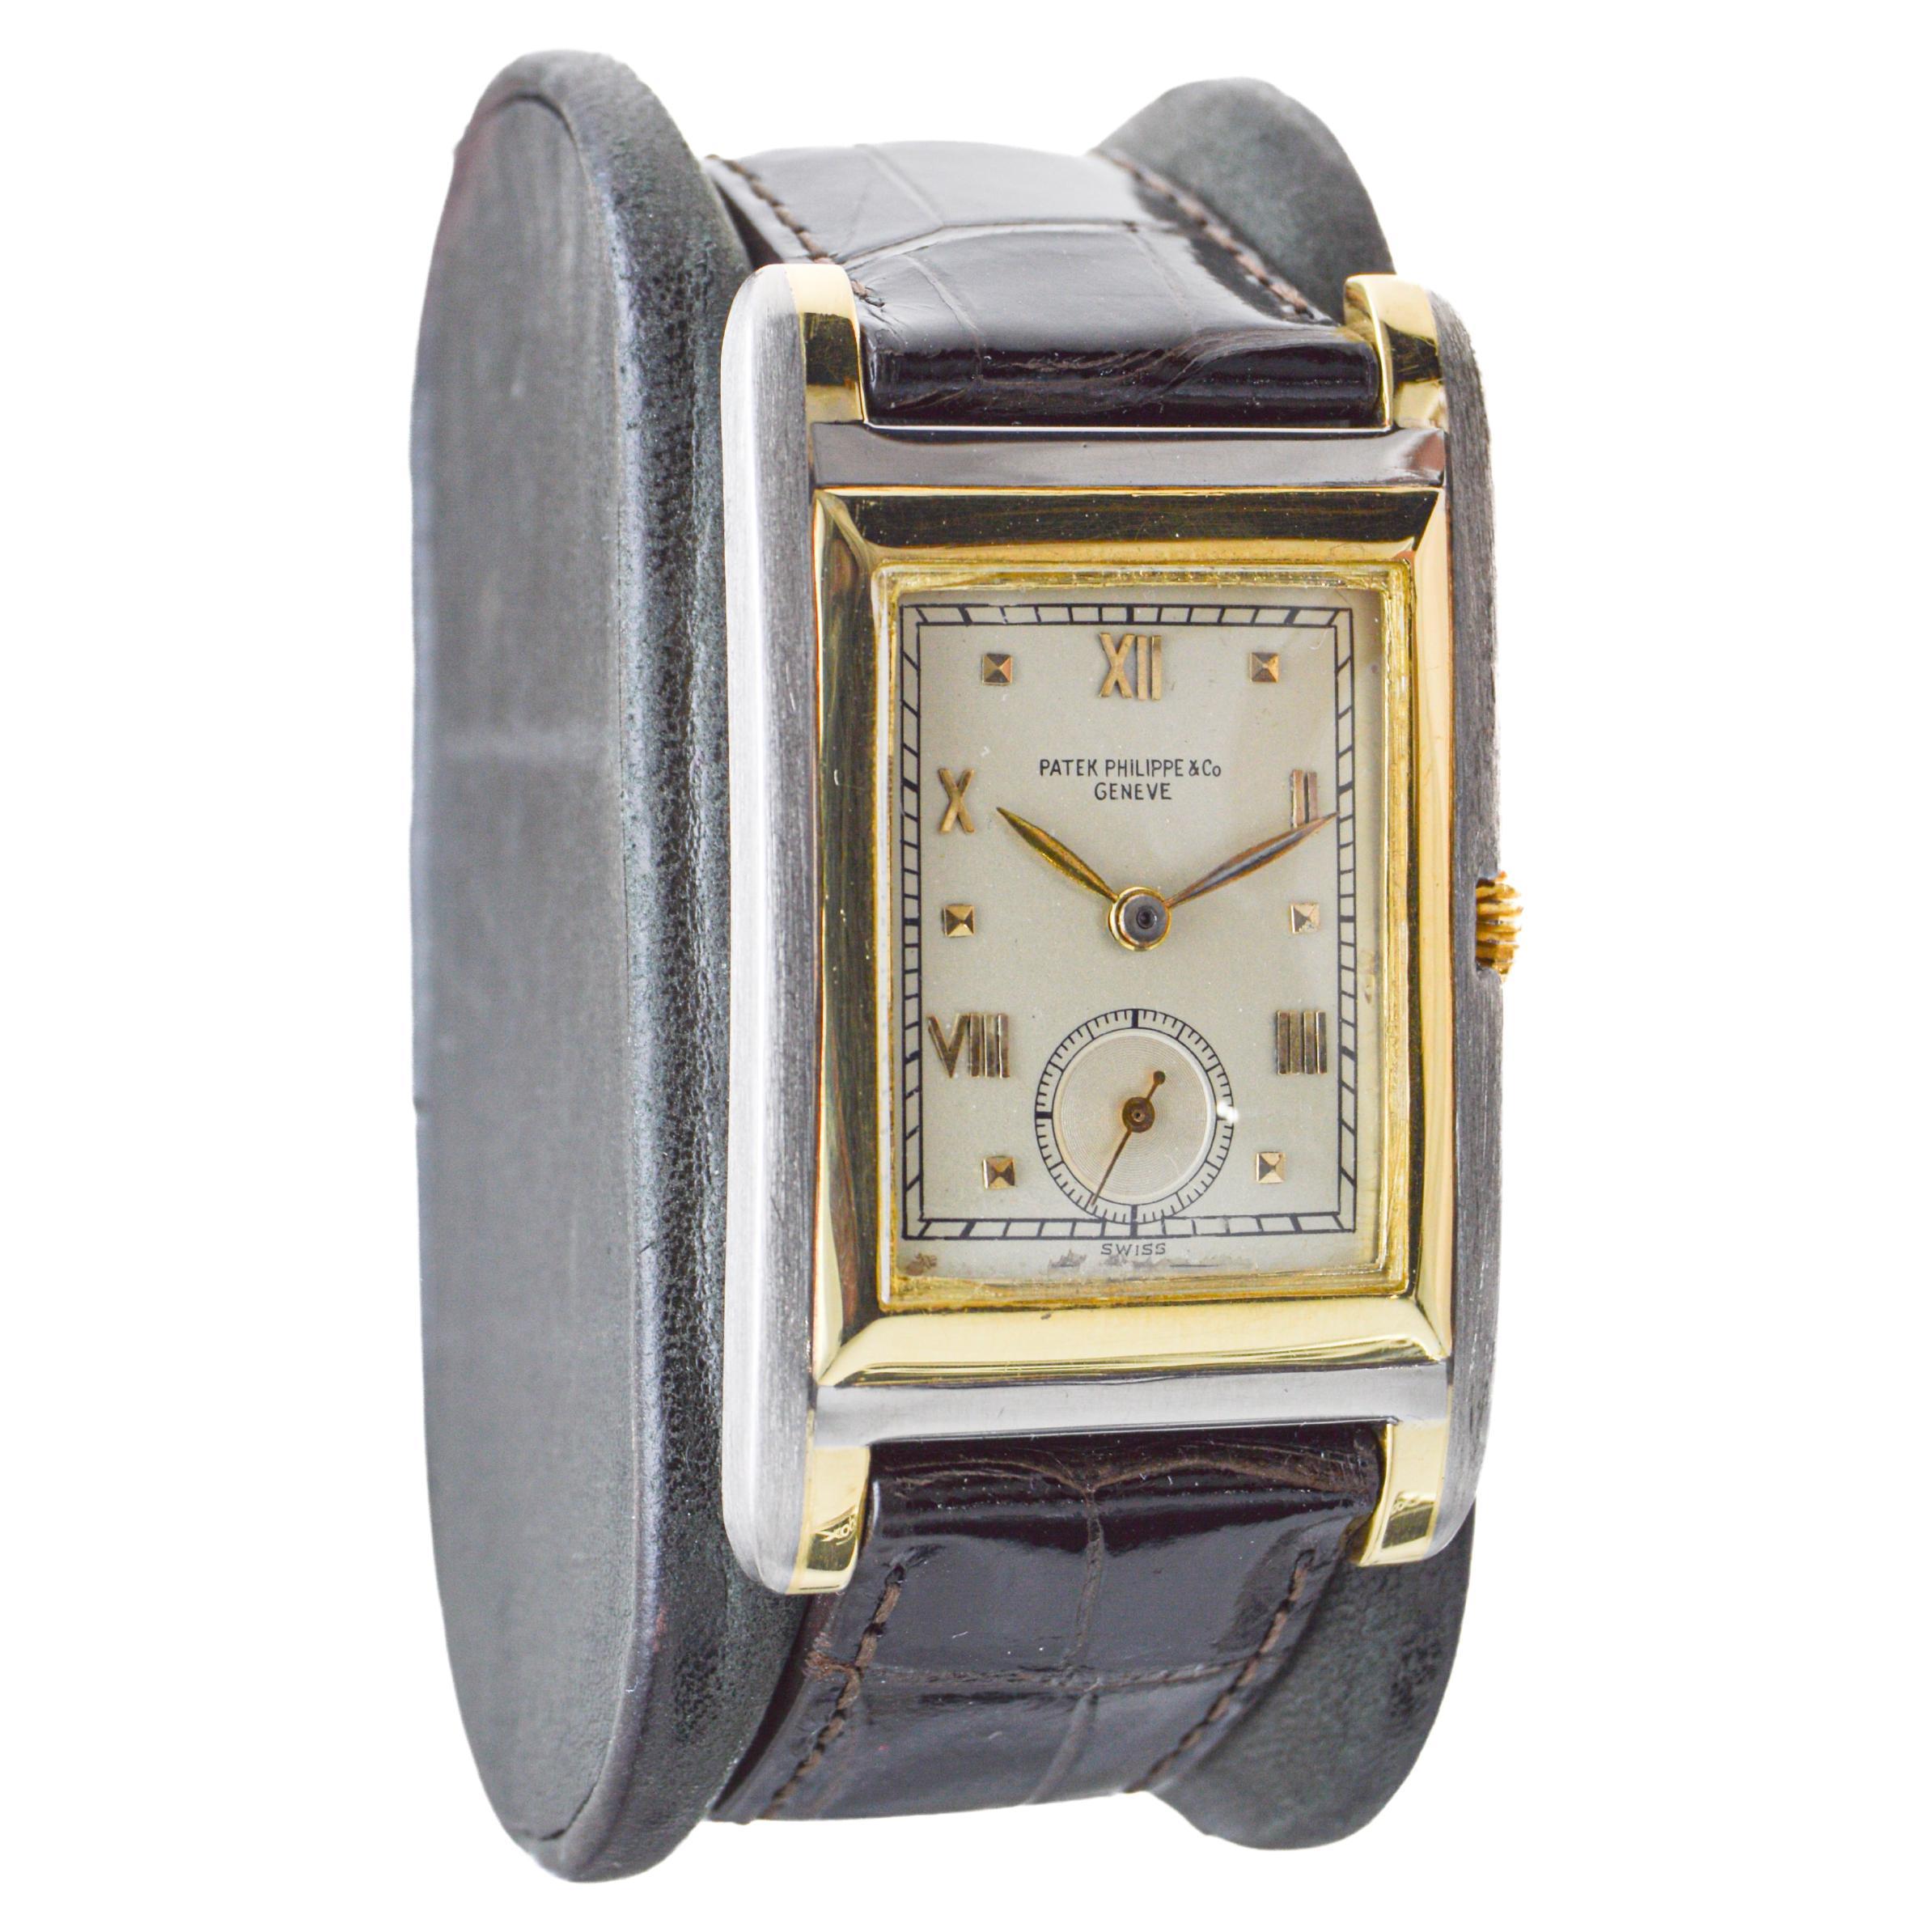 FACTORY / HOUSE: Patek Philippe
STYLE / REFERENCE: Art Deco / Tank Style
METAL / MATERIAL: 18kt Solid Yellow and White Gold
DIMENSIONS: Length 47mm X Width 29mm
CIRCA: 1940's
MOVEMENT / CALIBER: Manual Winding / 18 Jewels / Cal. 9/90
DIAL / HANDS: